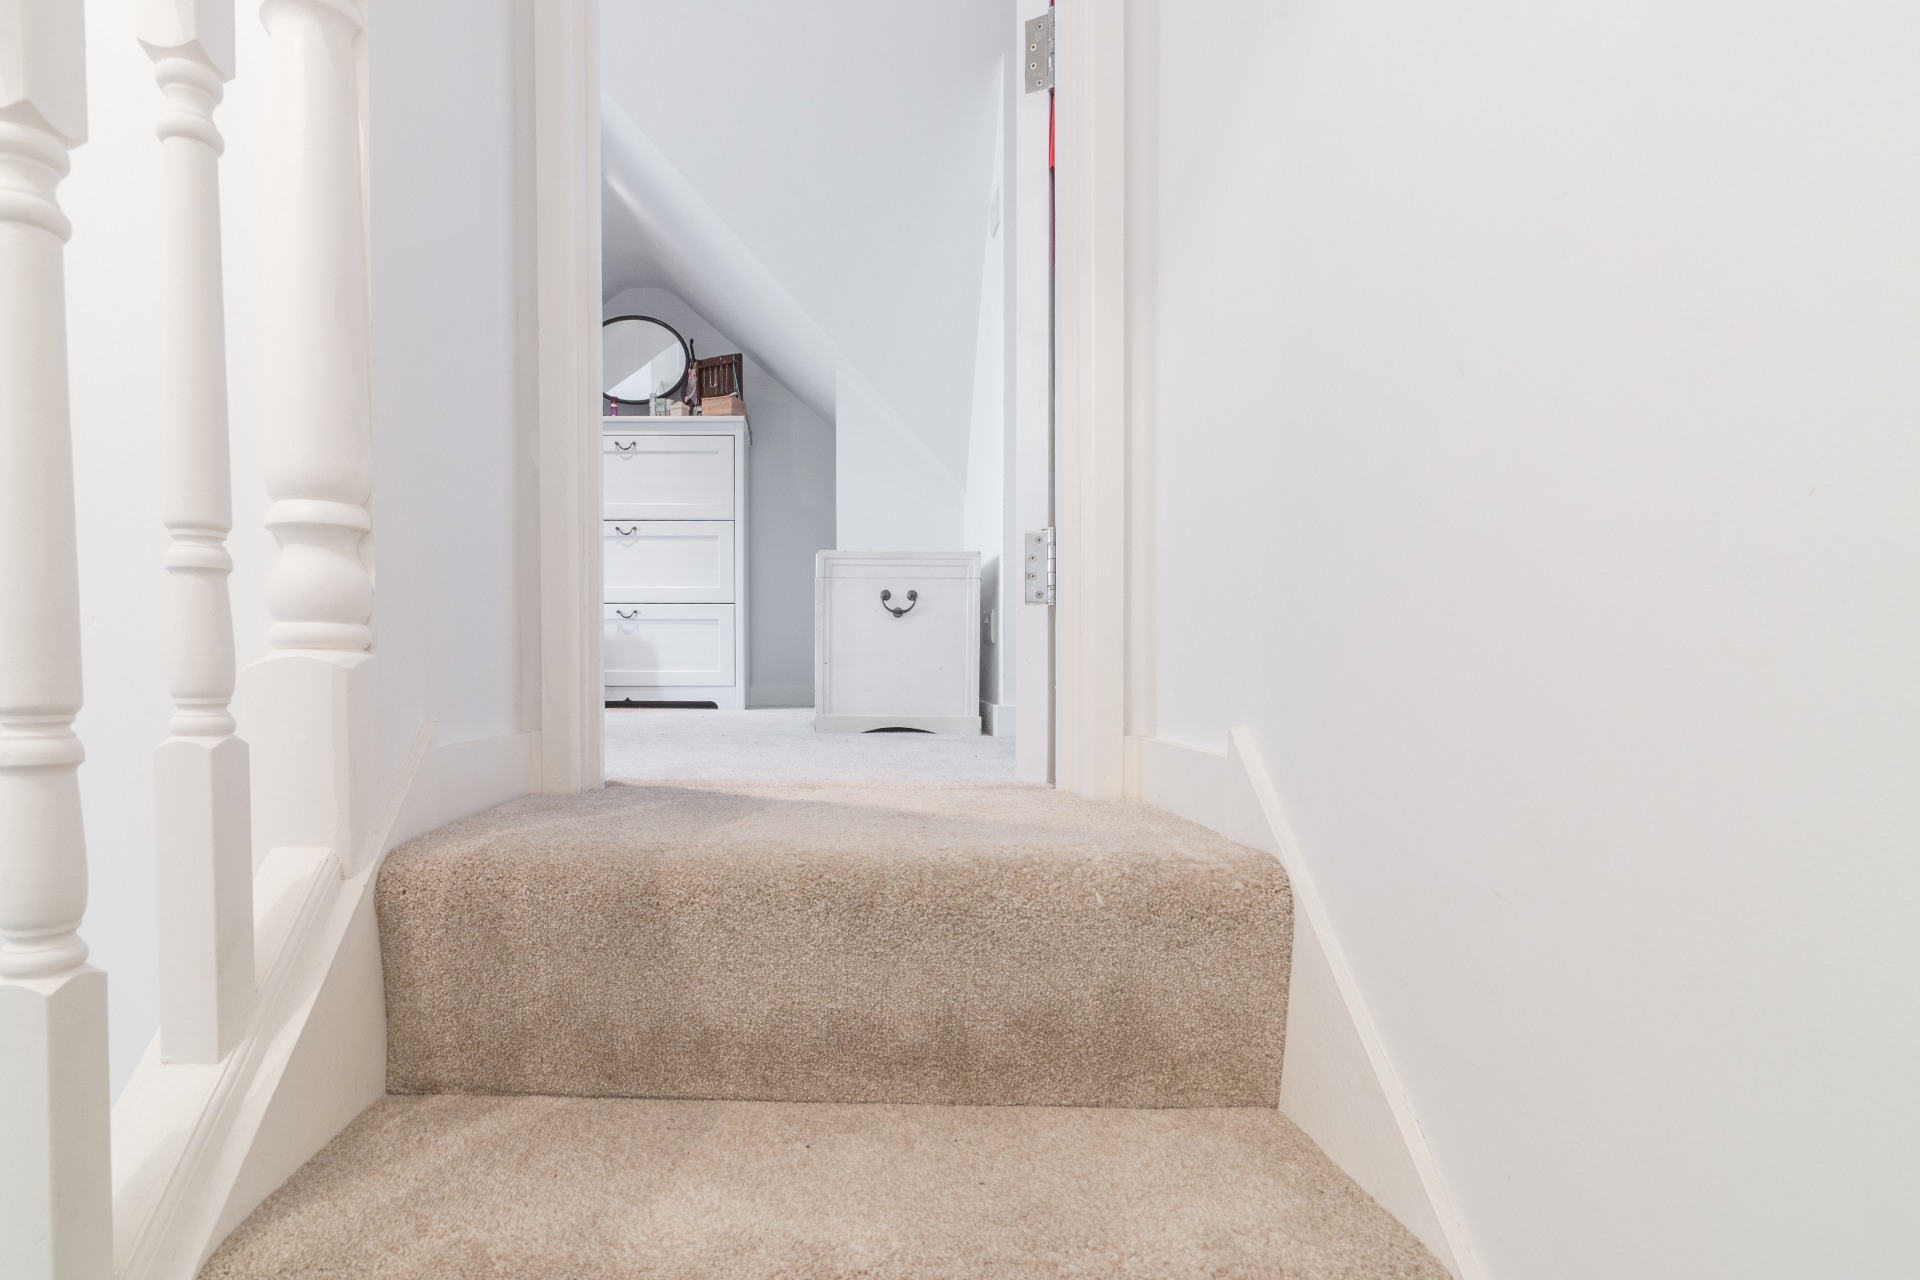 Staircase to loft conversion, Windsor